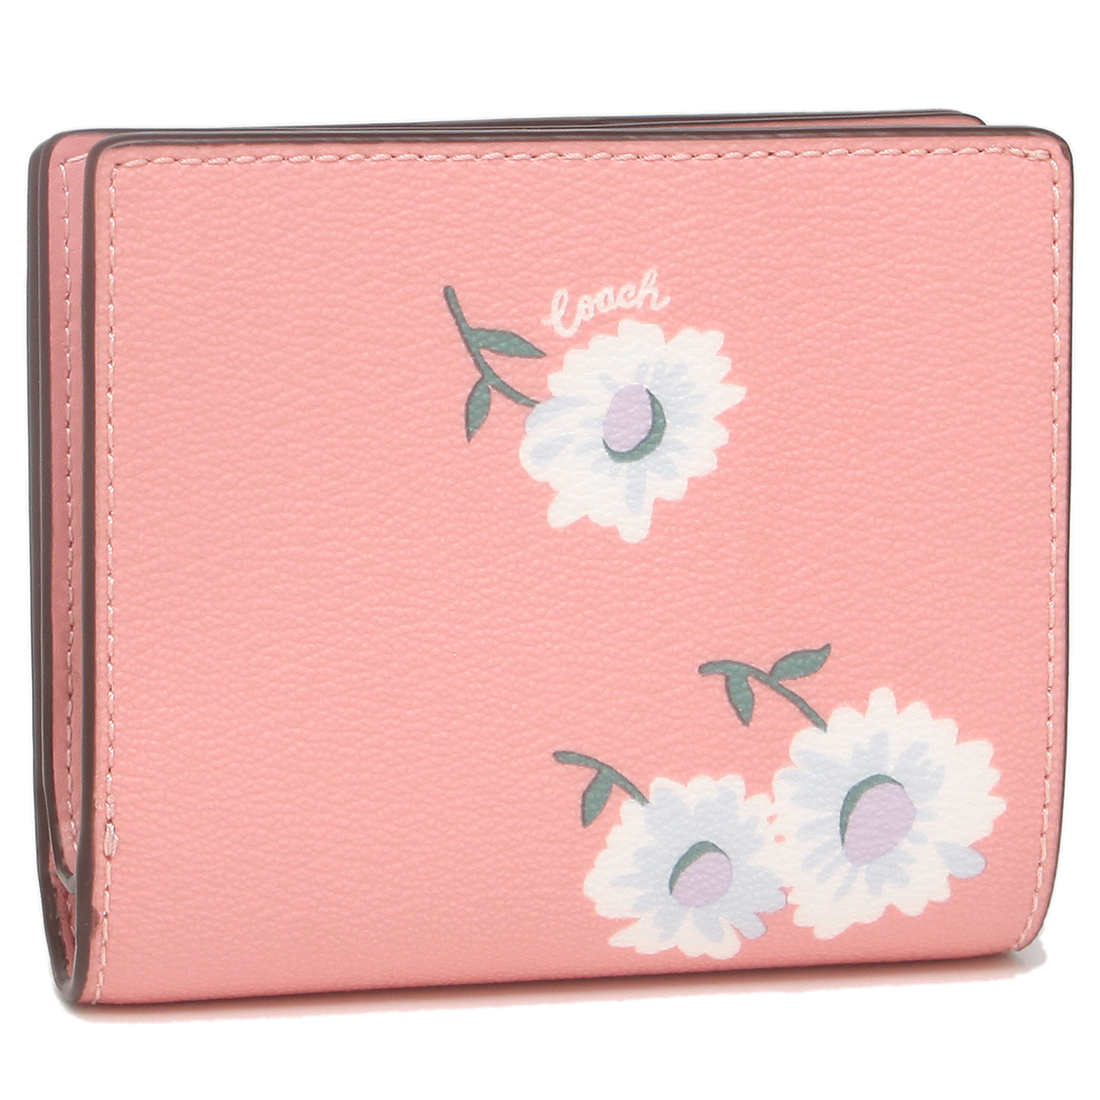 VÍ NỮ NGẮN LIMITED COACH BOXED SNAP WALLET WITH DAISY PRINT C2889 5